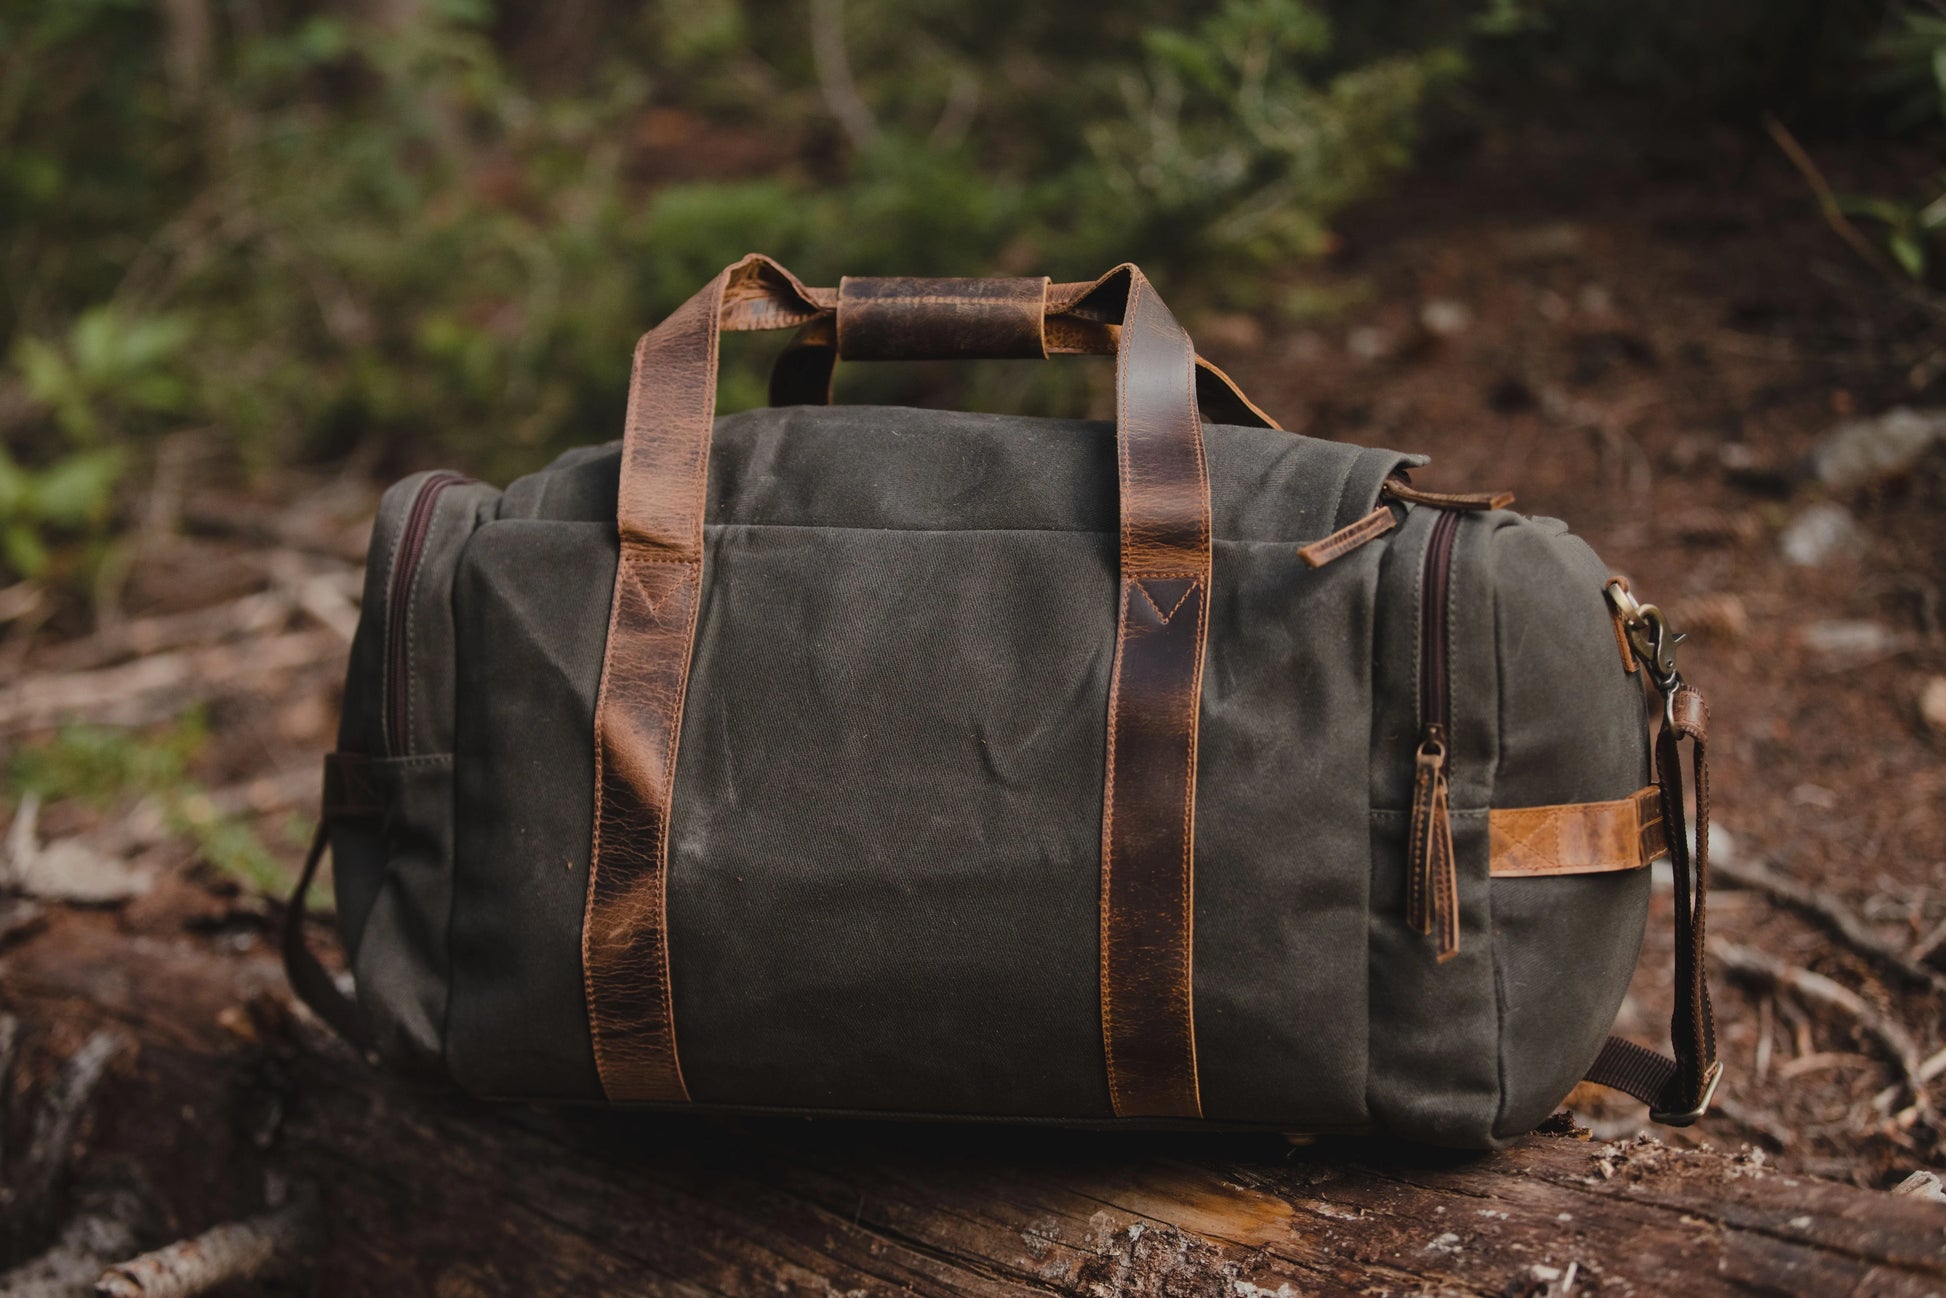 Handmade Waxed Canvas Backpack 50 L Green Brown Options Leather